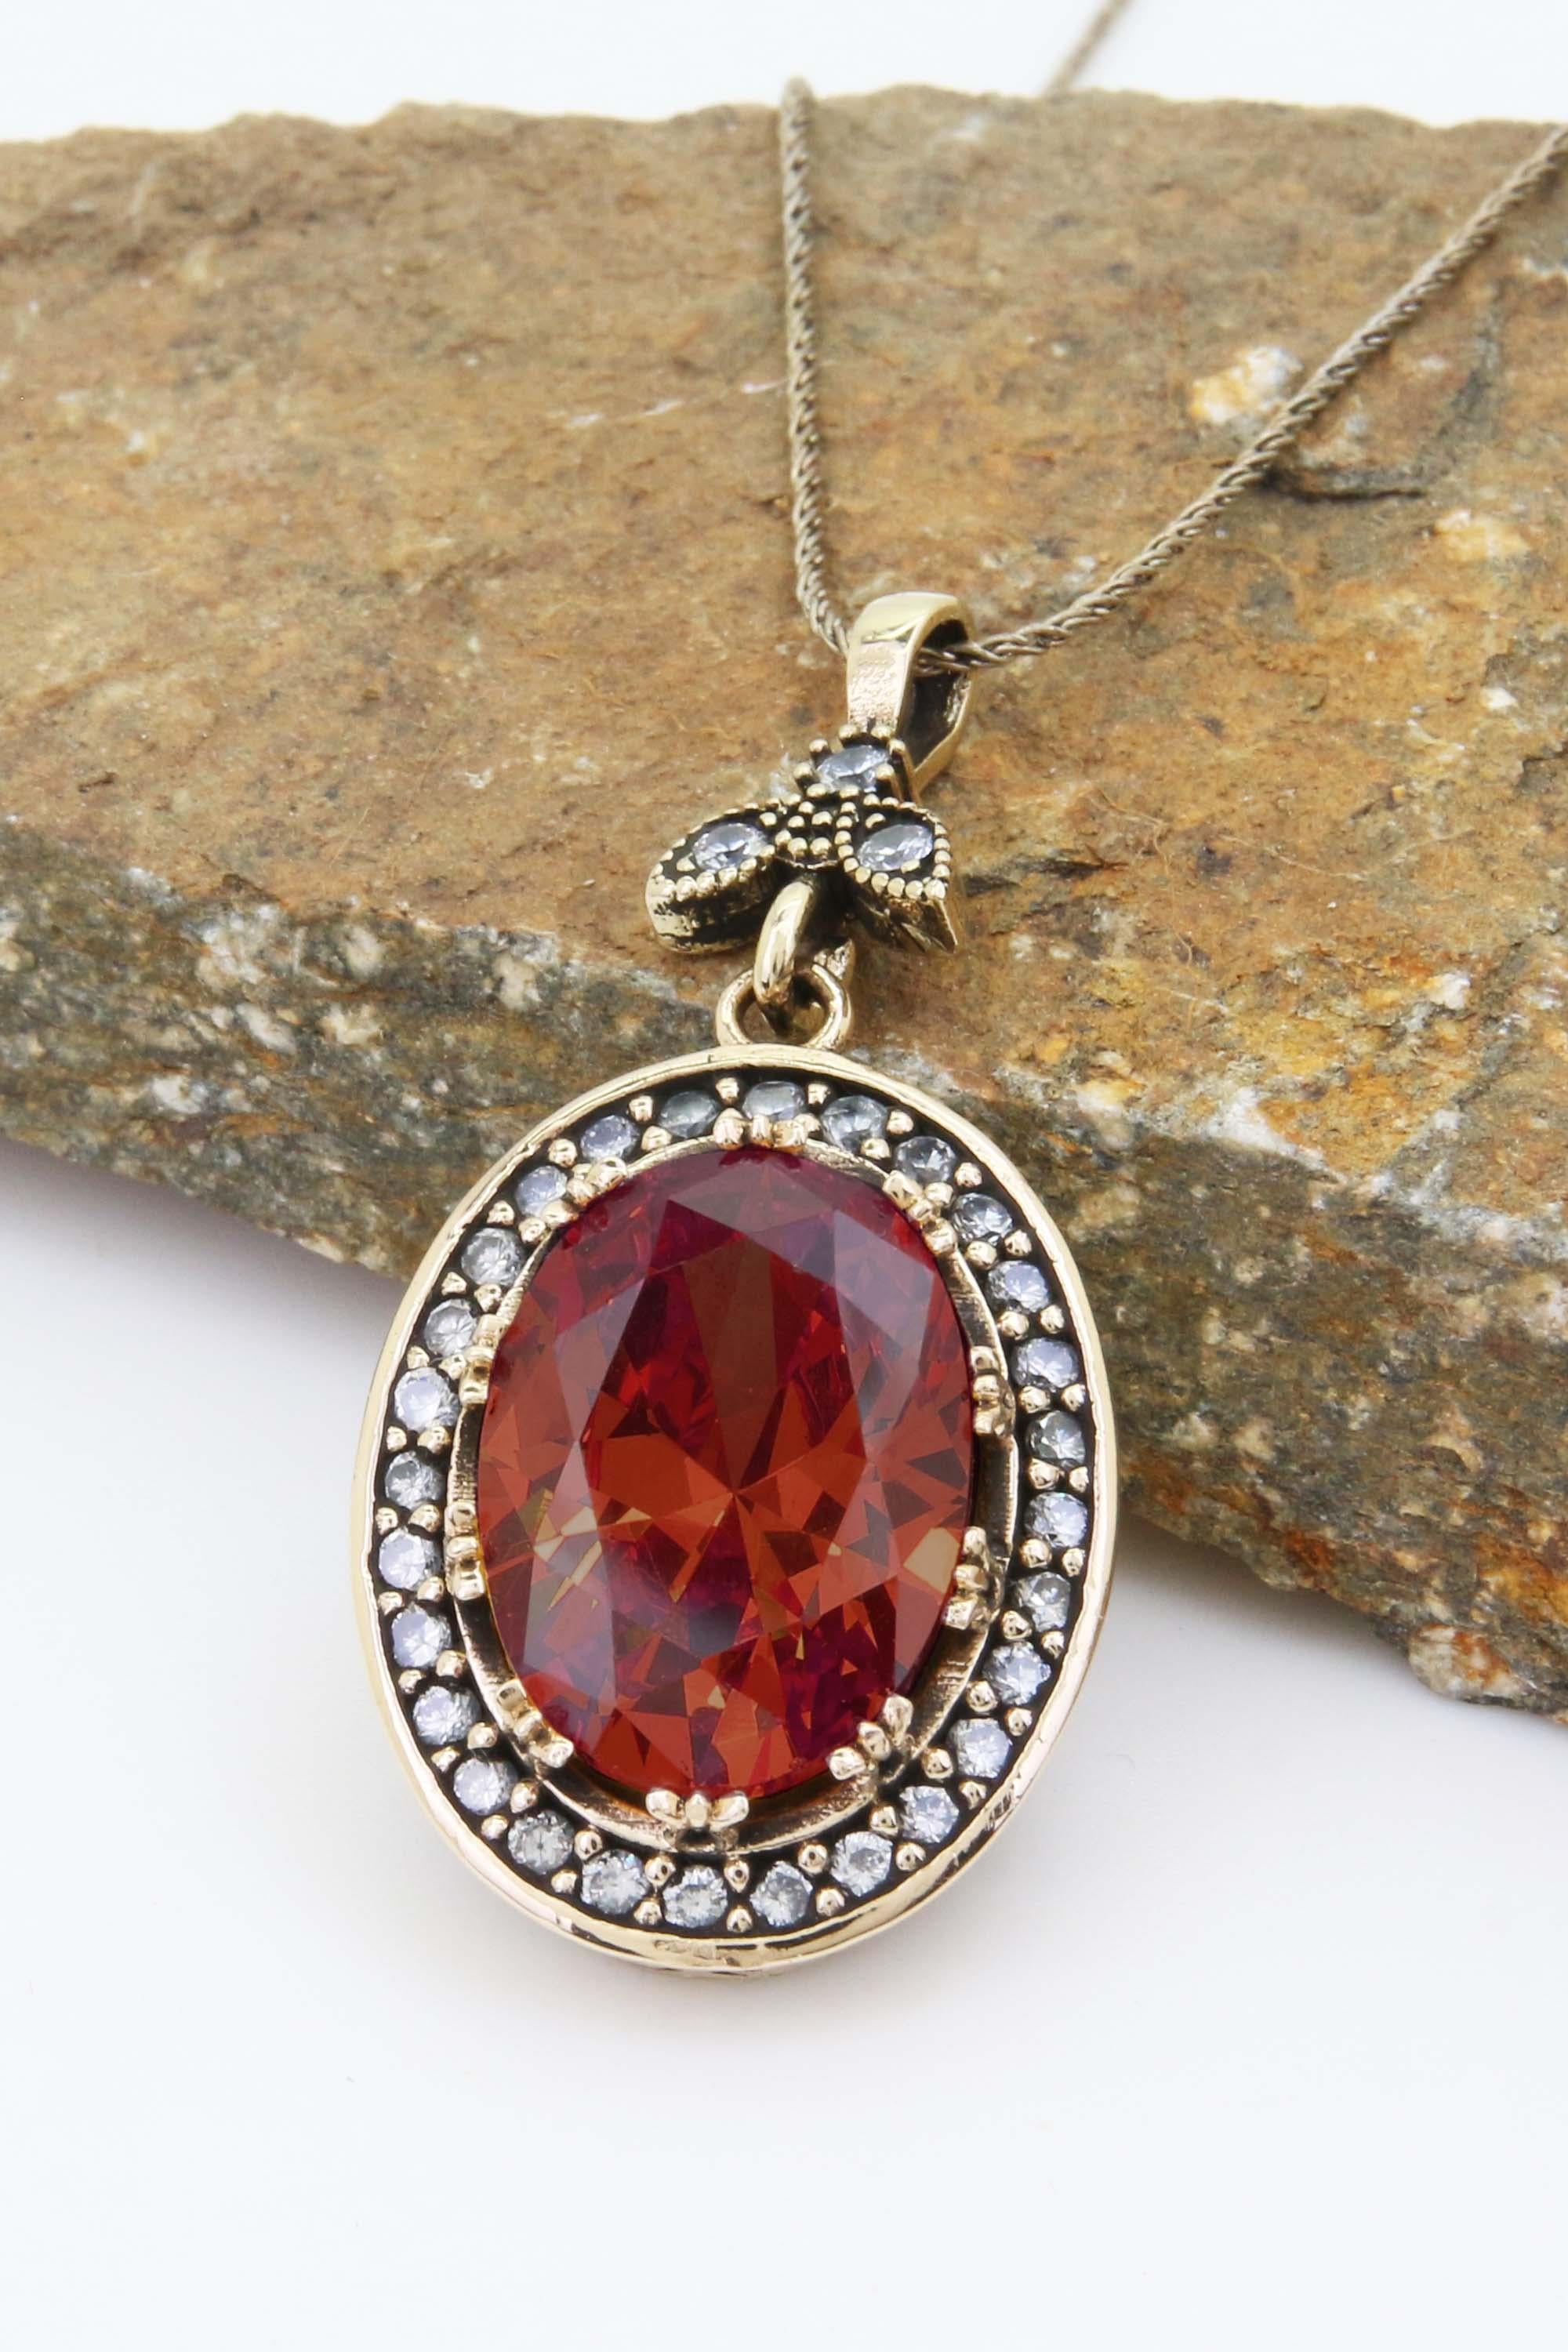 Authentic Series Red Garnet Stone Authentic Sterling Silver Women's  Necklace with Colorful Stones